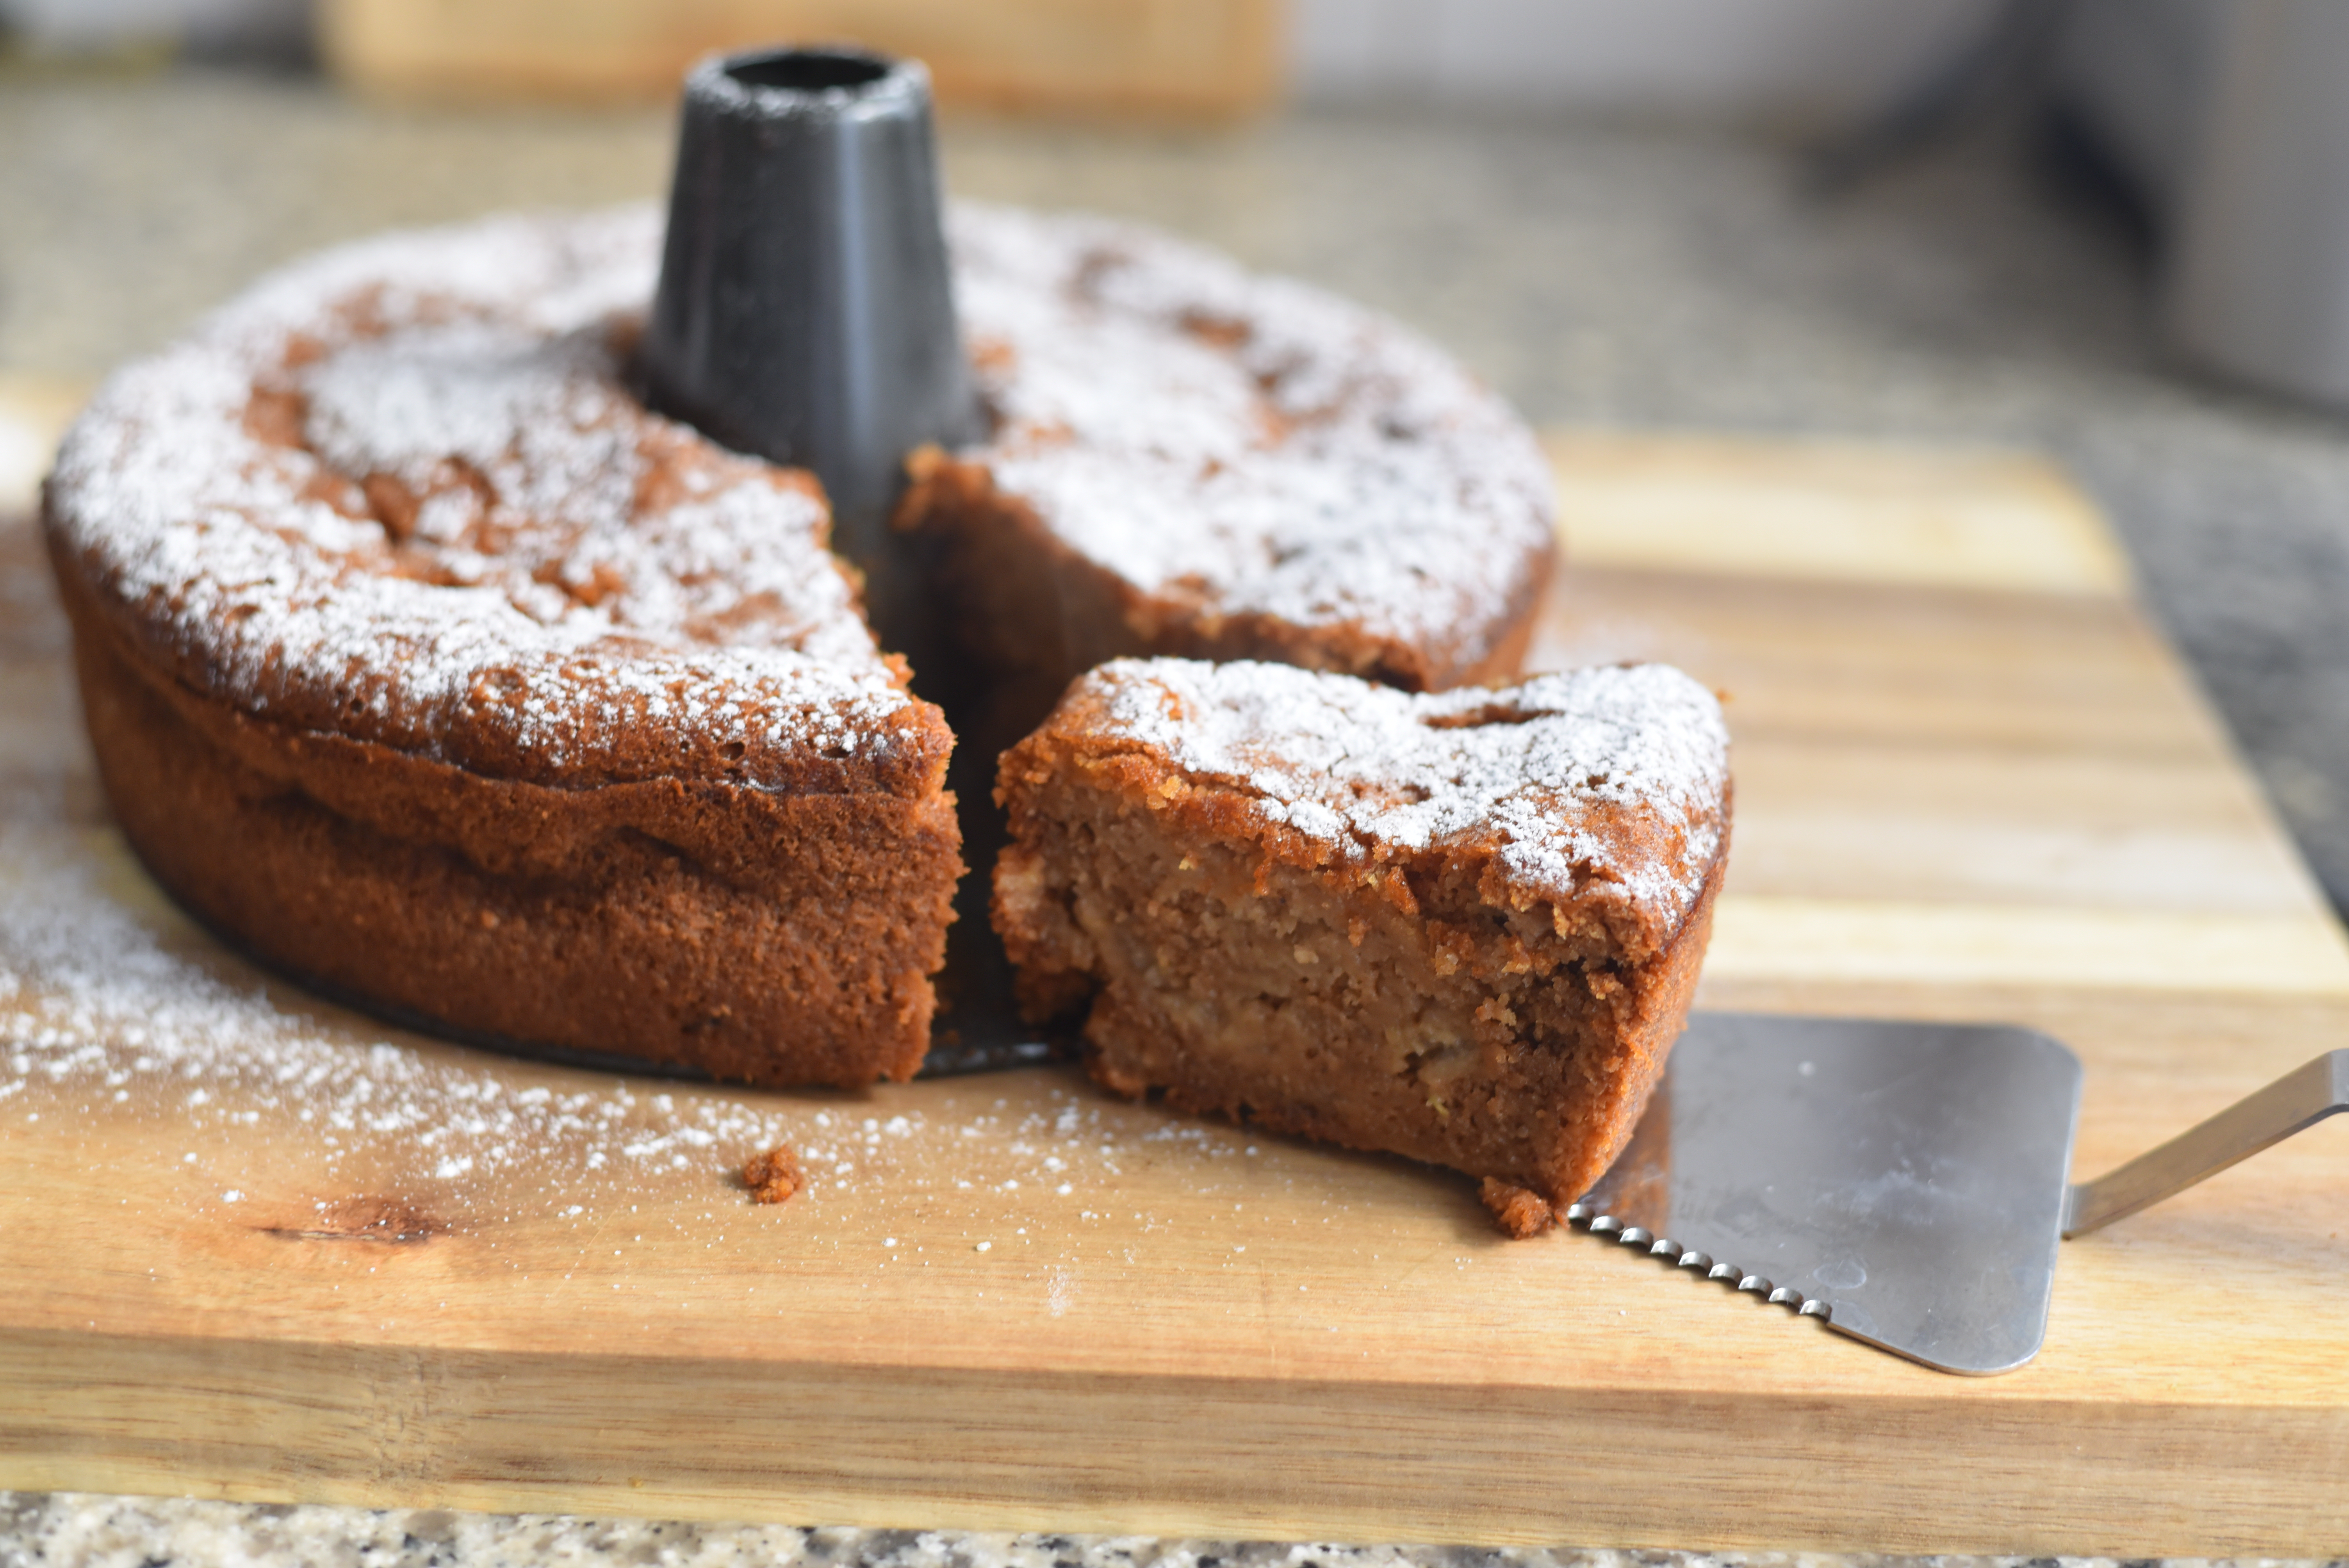 Apple and Olive Oil Cake